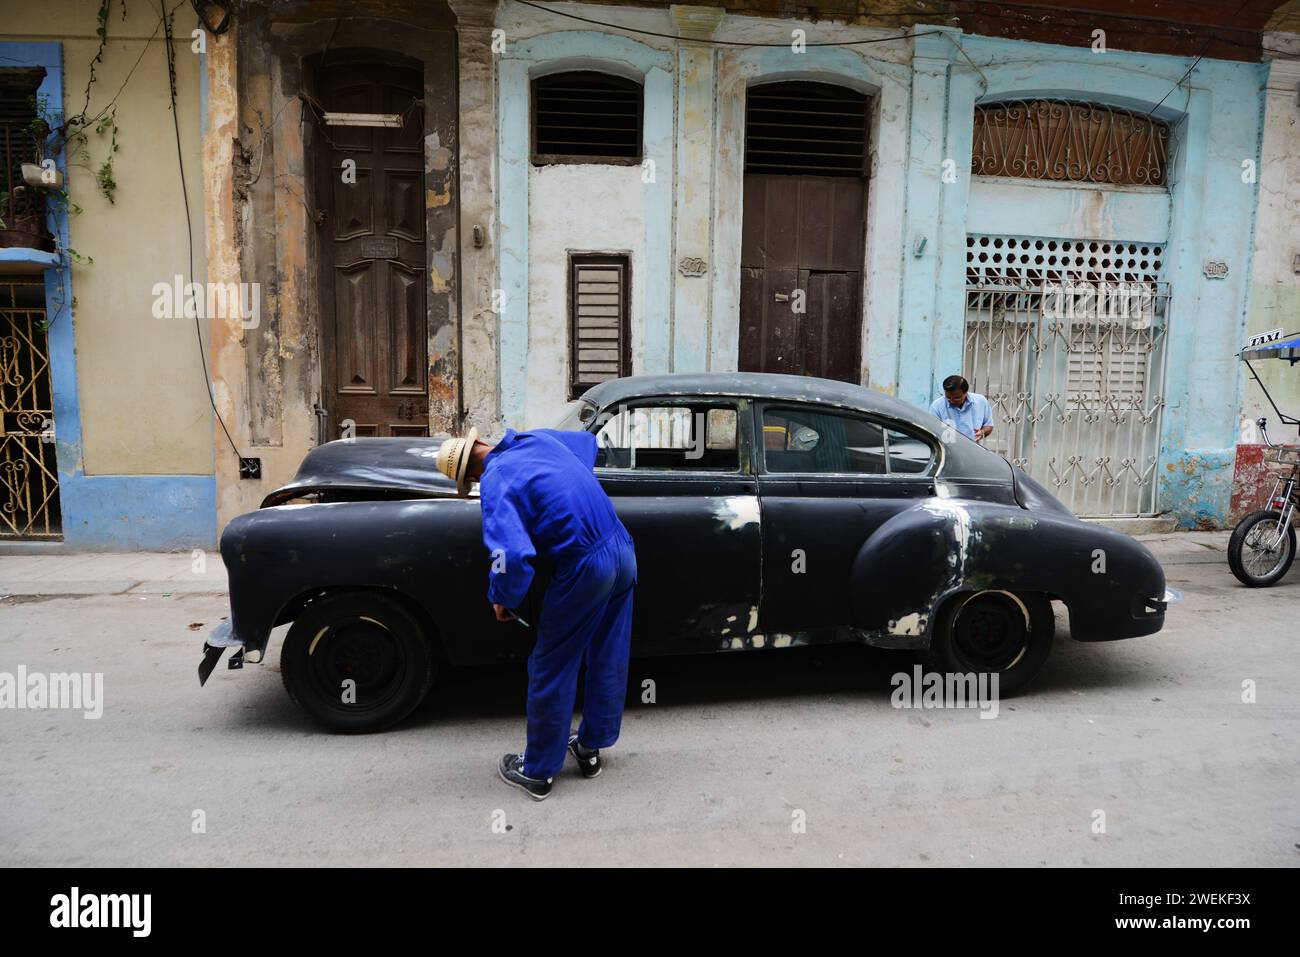 Fixing an old Chevrolet car on the street in Old Havana, Cuba. Stock Photo